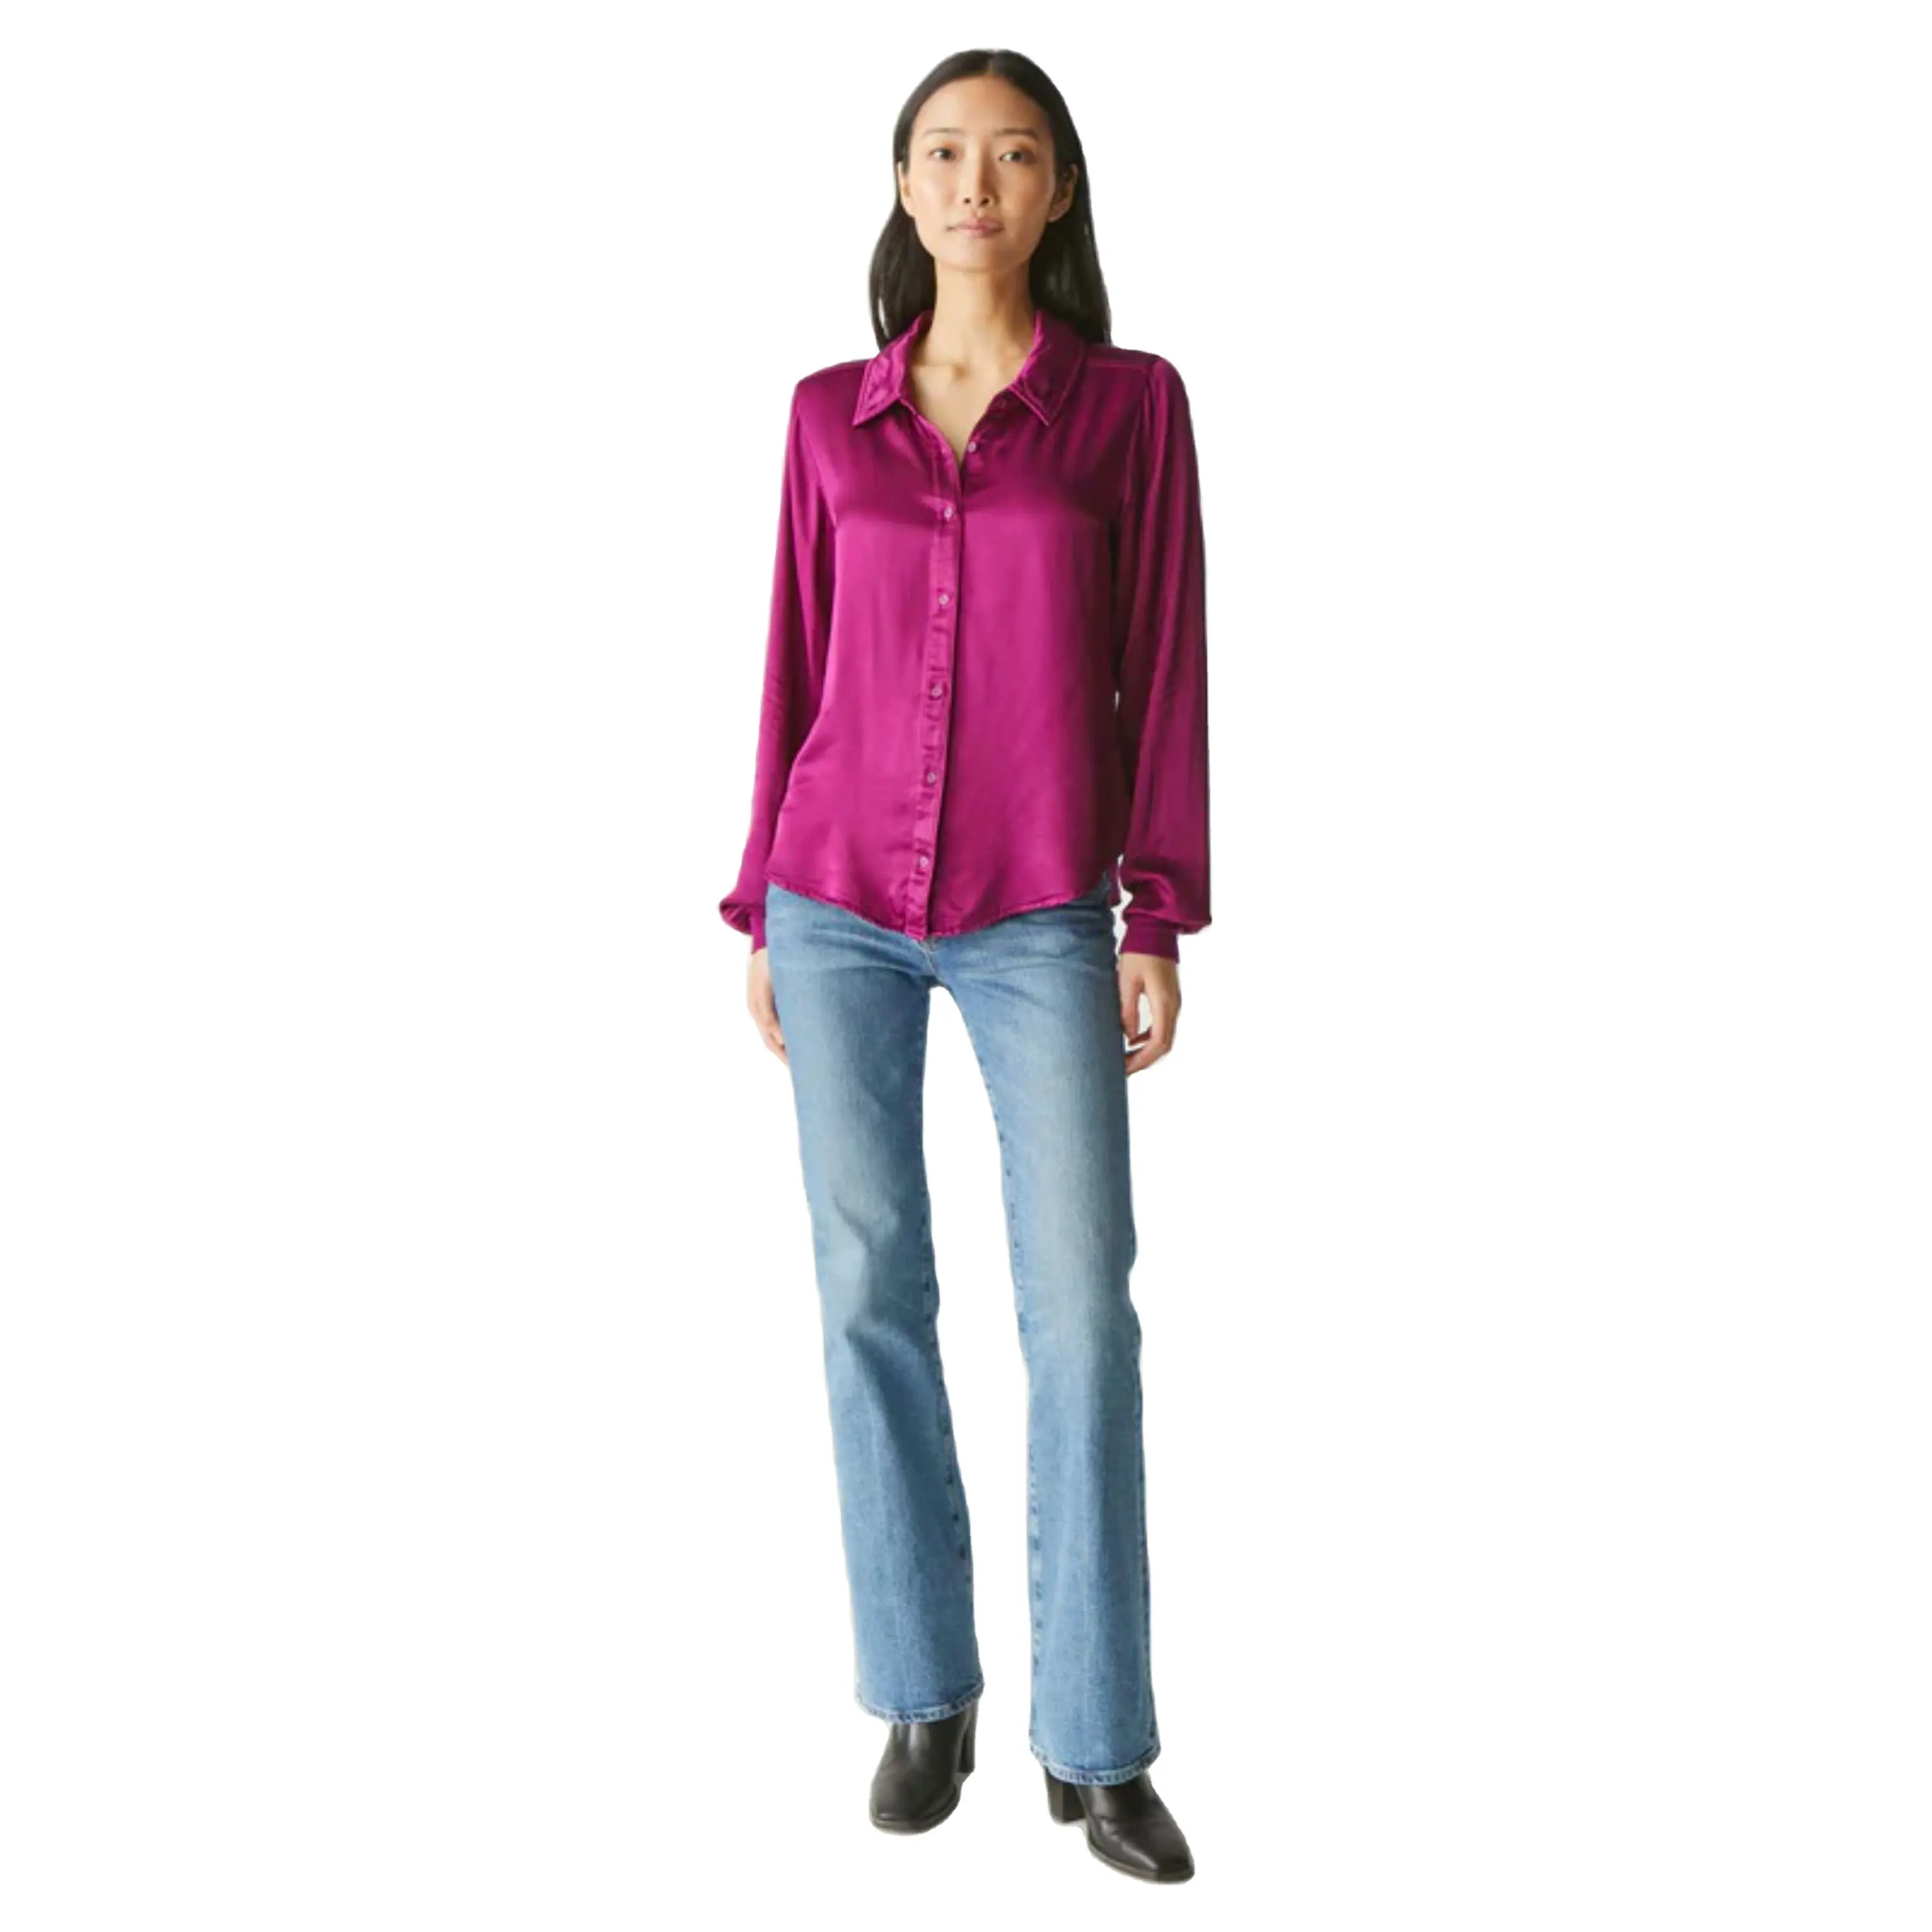 Stylish Women Satin Blouse - Smooth and Silky Texture, Ideal for Professional and Casual Wear, Comes in a Variety of Shades